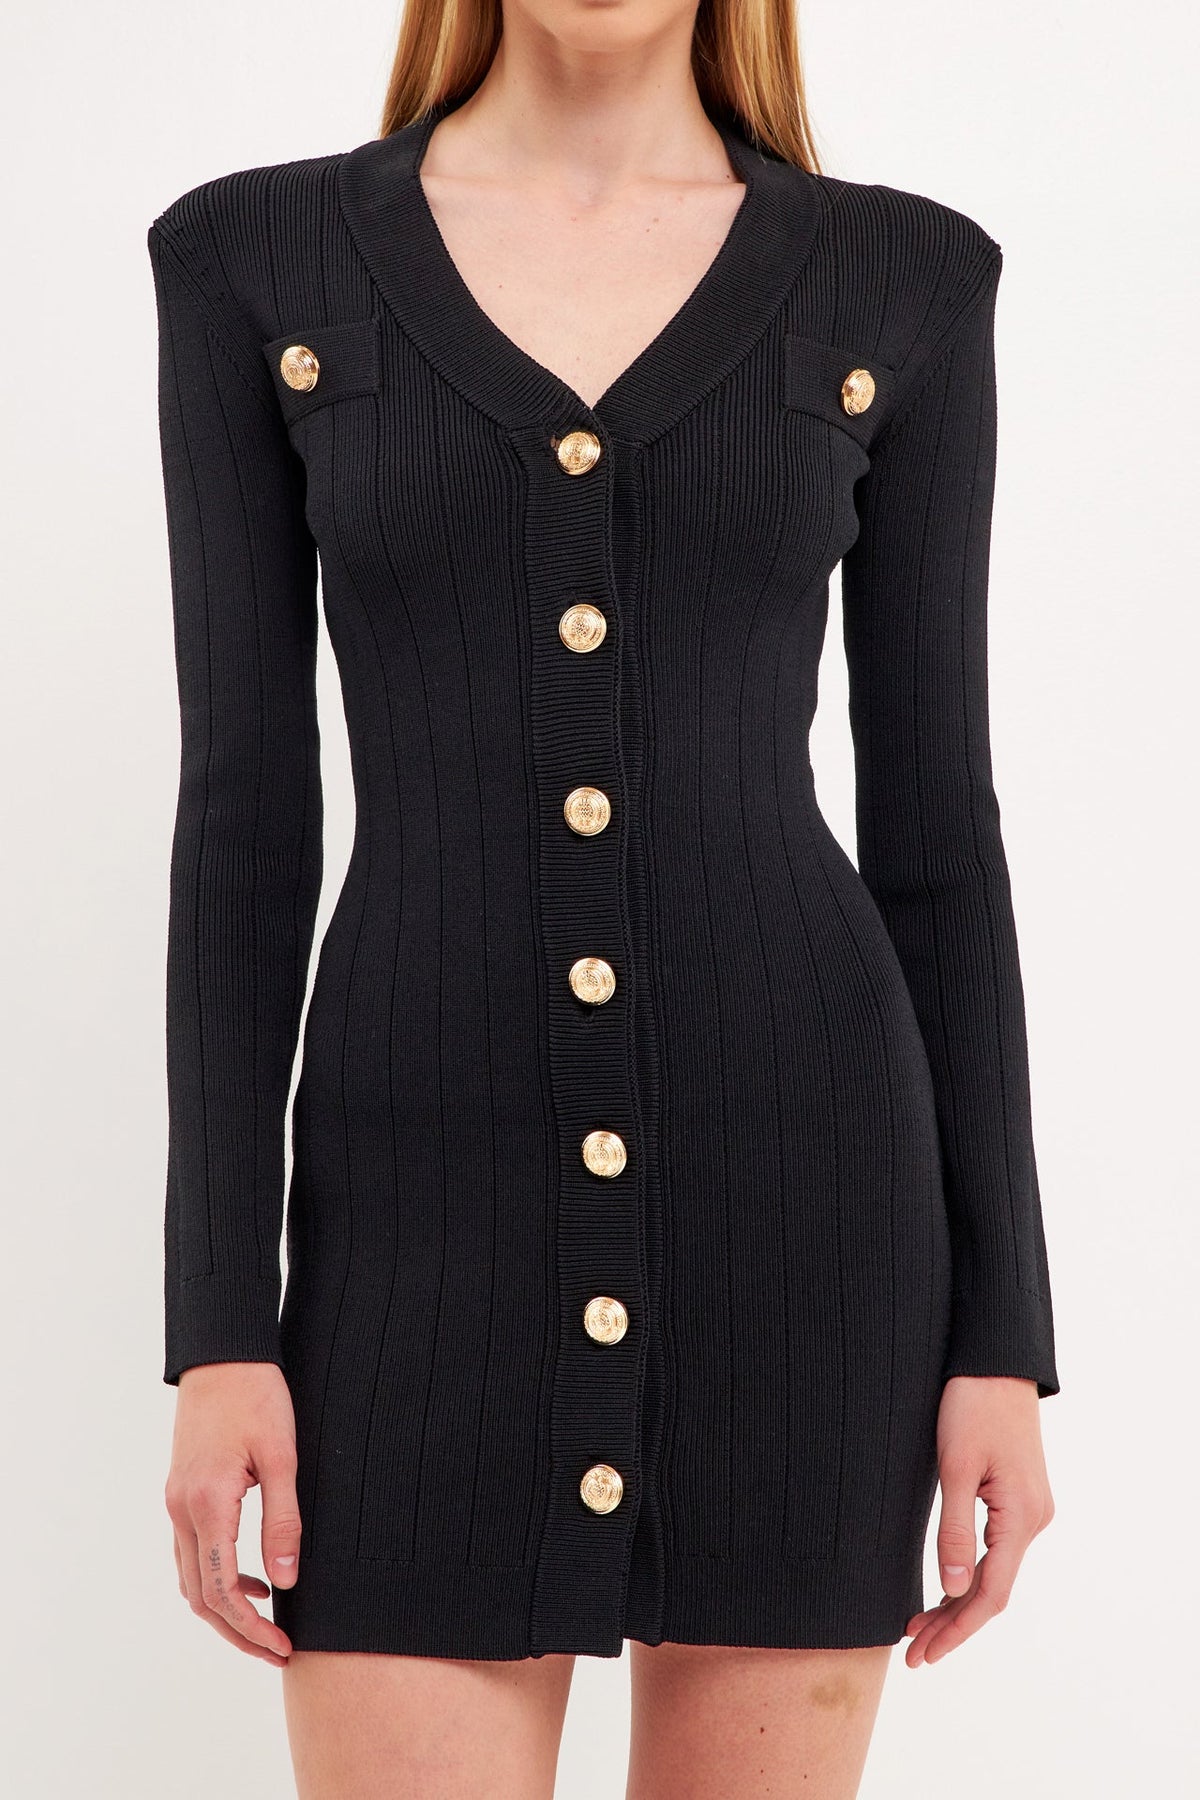 ENDLESS ROSE-Shank Button V-Neckline Knit Mini Dress-DRESSES available at Objectrare